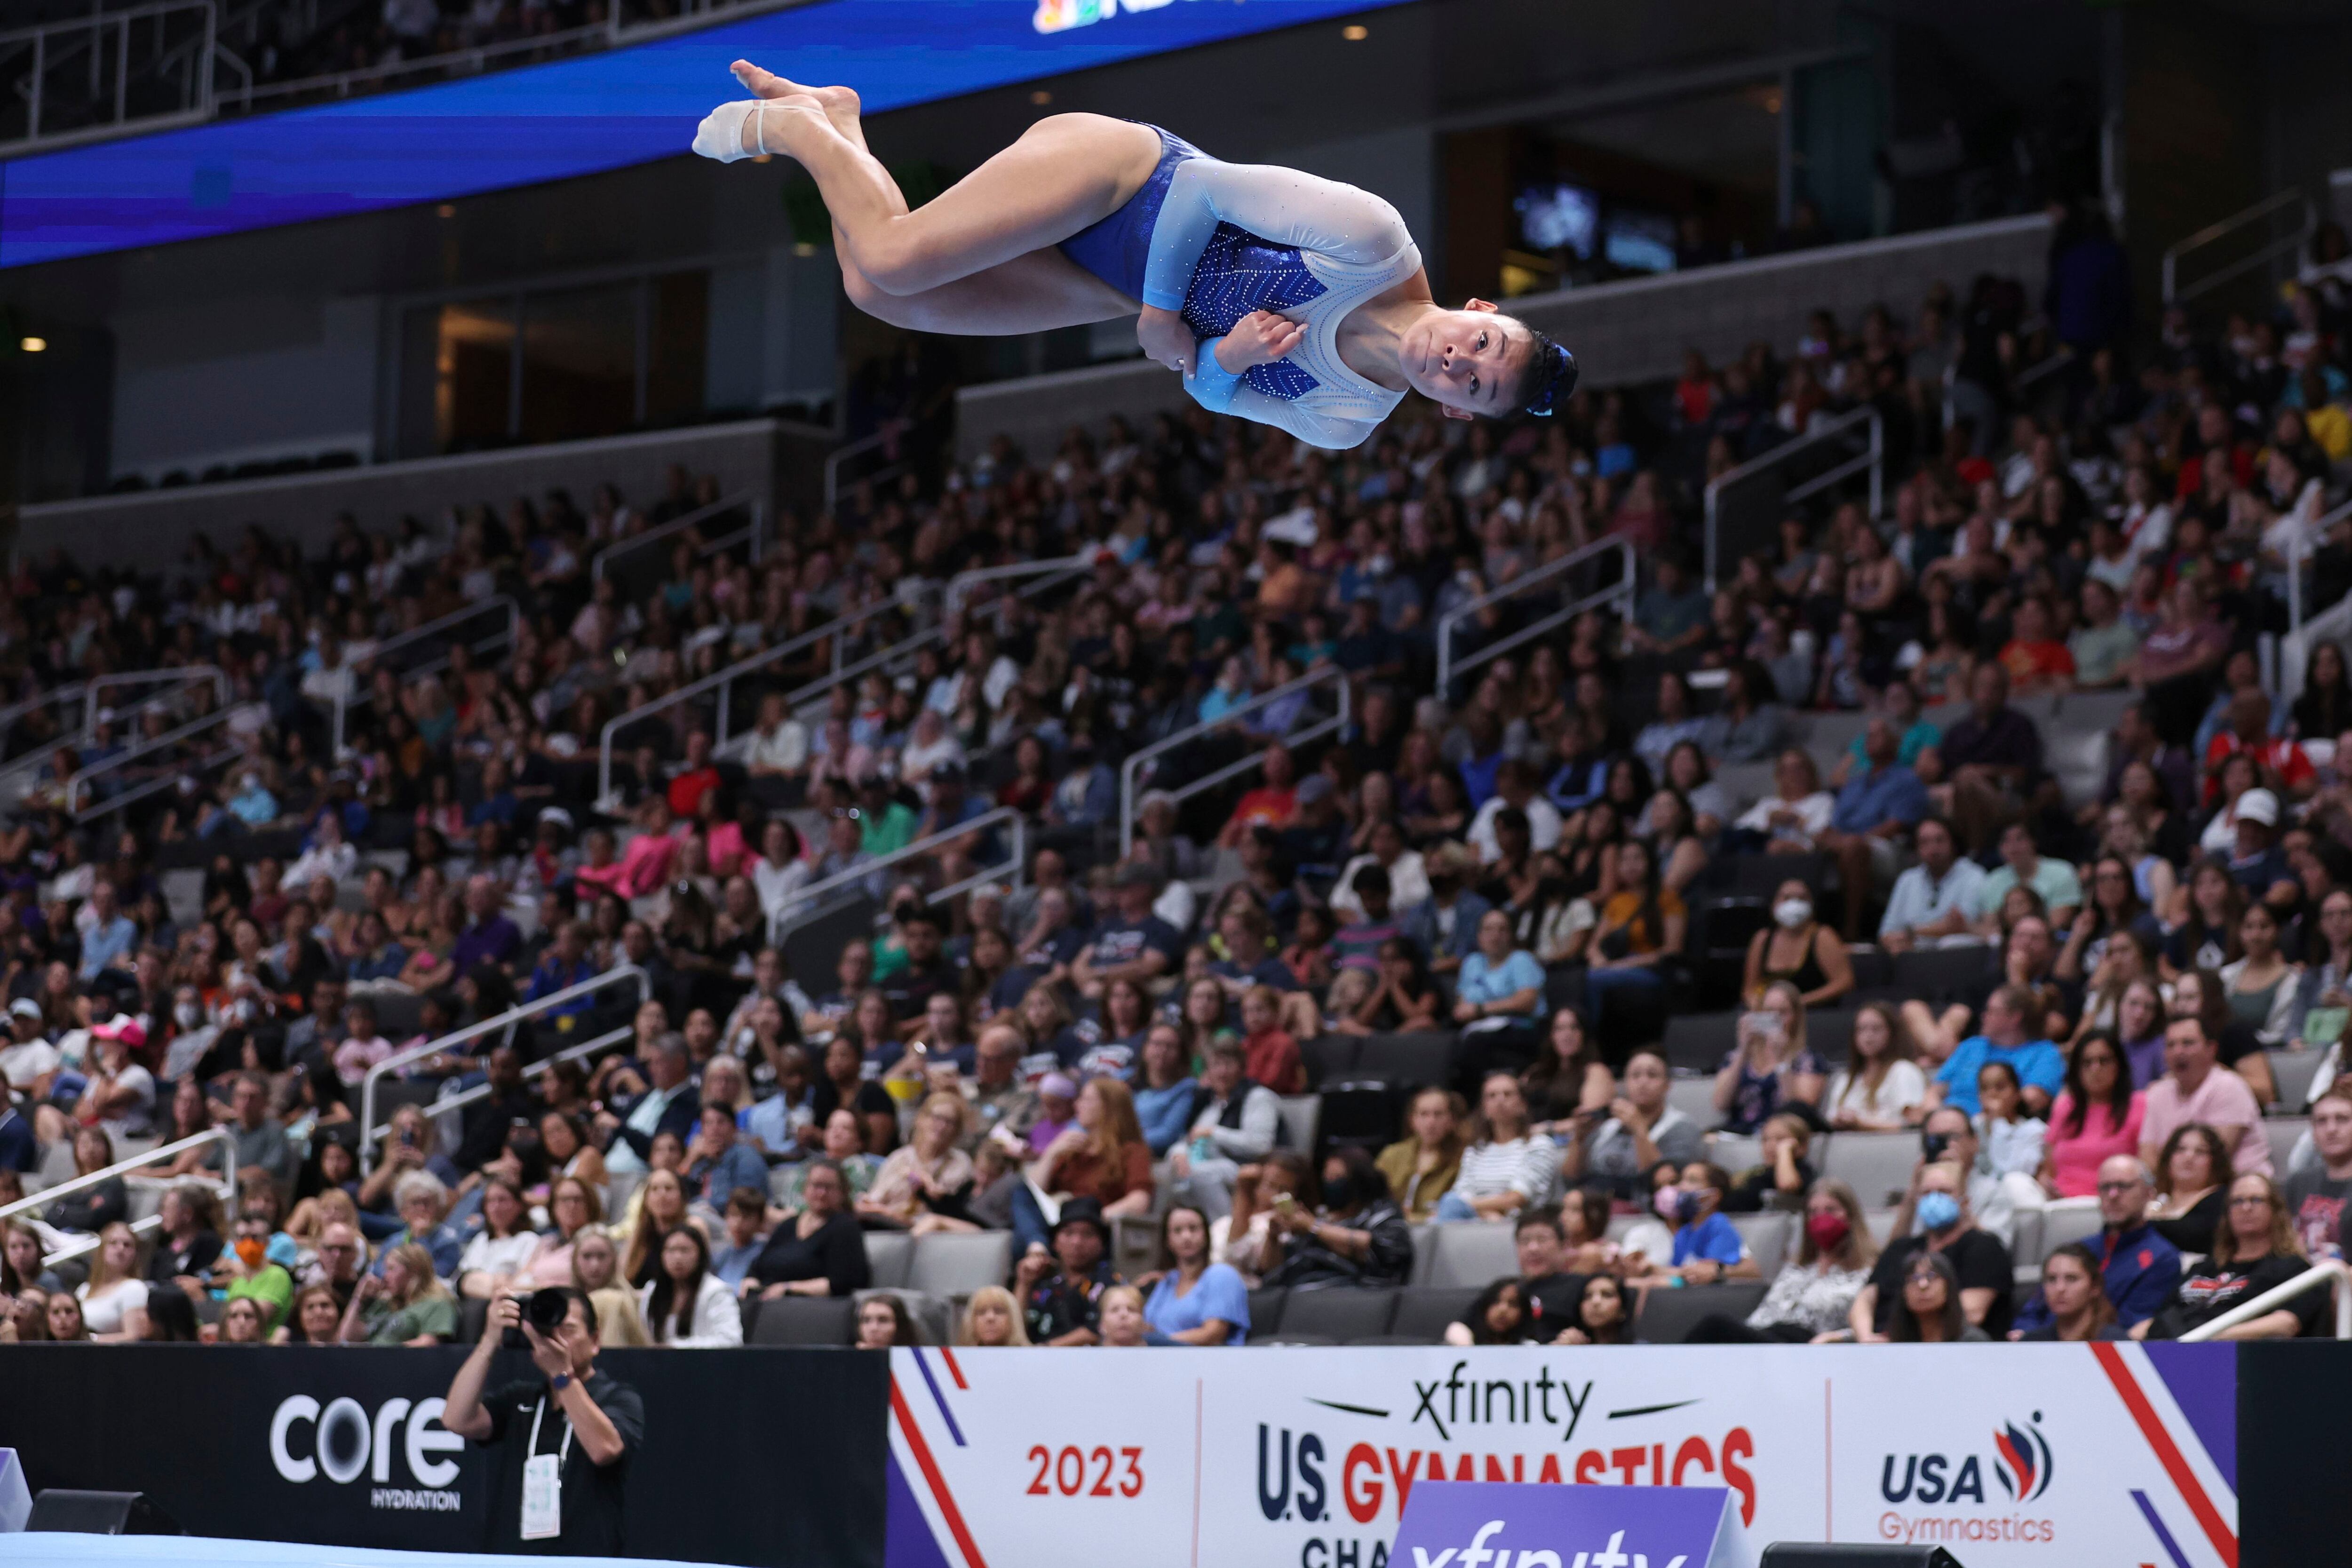 Leanne Wong Joins U.S. Gymnastics Olympic Team as a Replacement Athlete -  Florida Gators